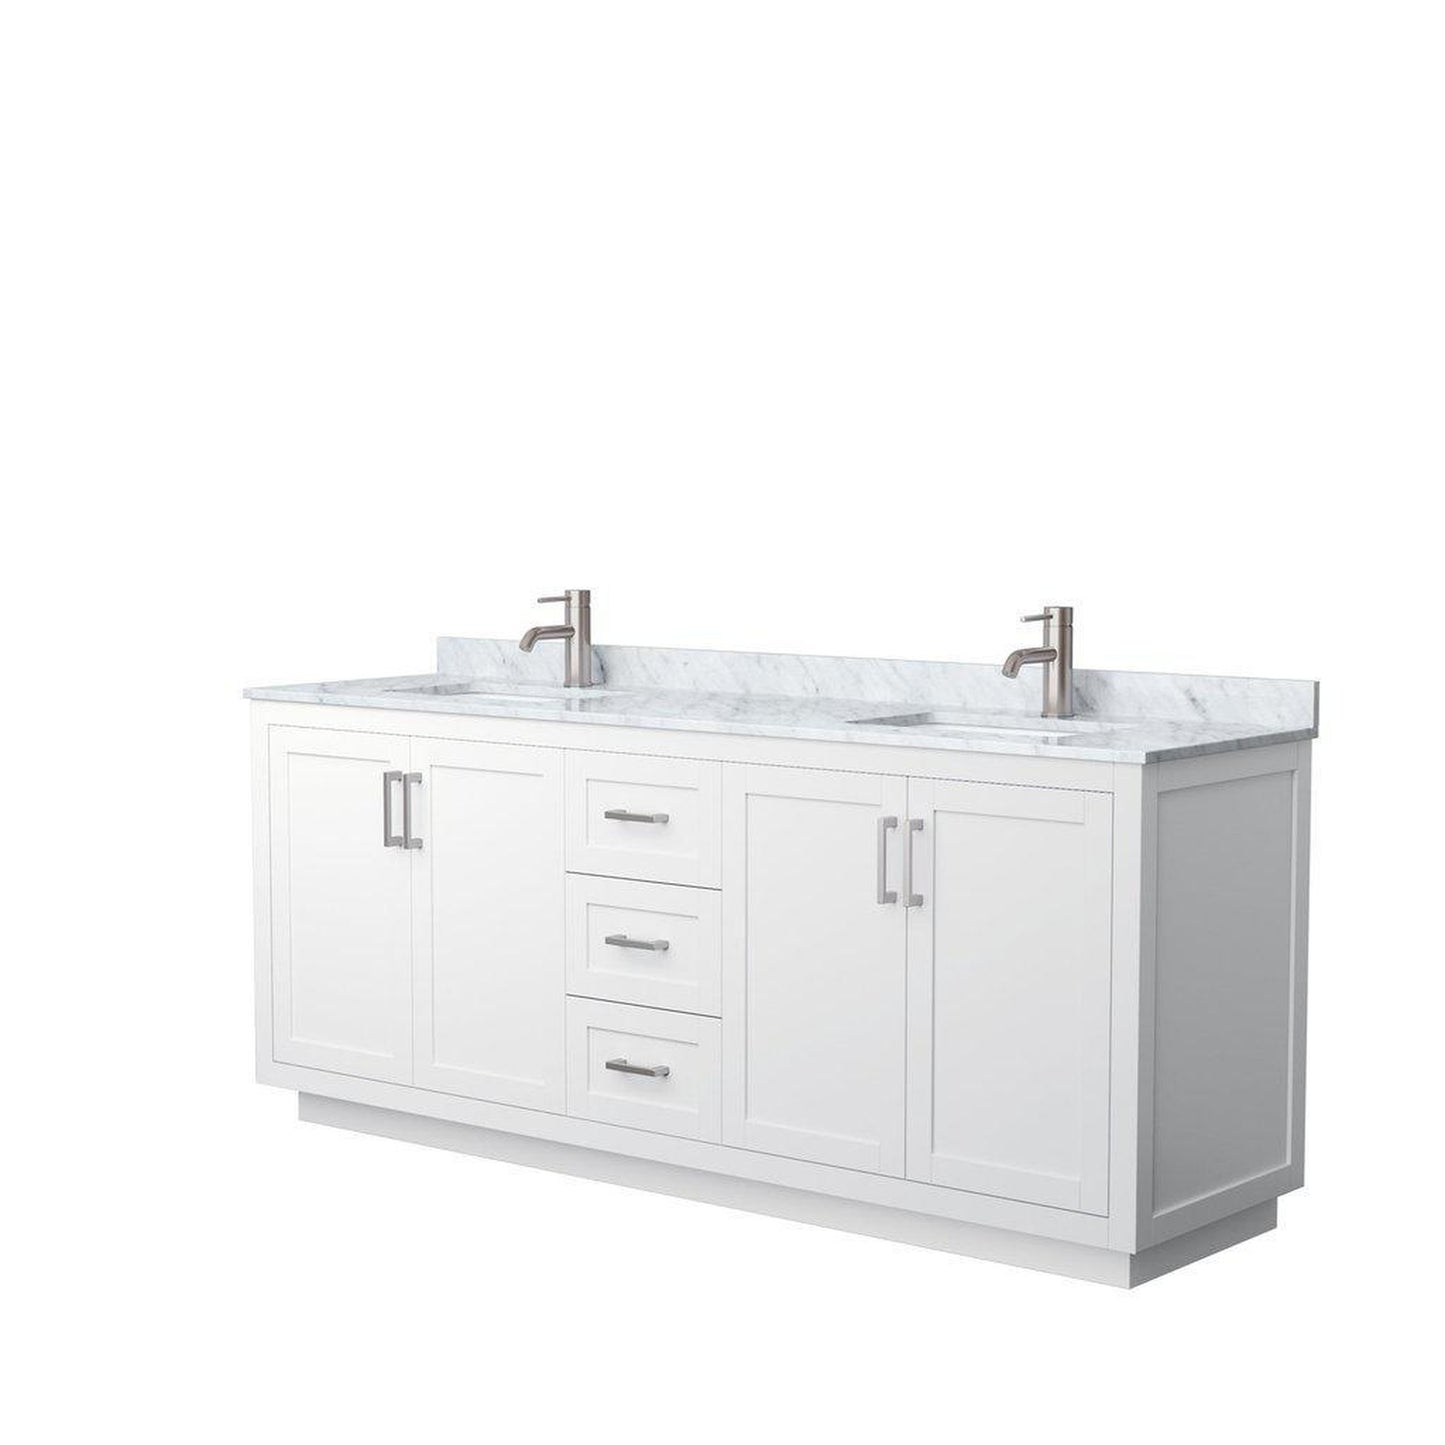 Wyndham Collection Miranda 80" Double Bathroom White Vanity Set With White Carrara Marble Countertop, Undermount Square Sink, And Brushed Nickel Trim